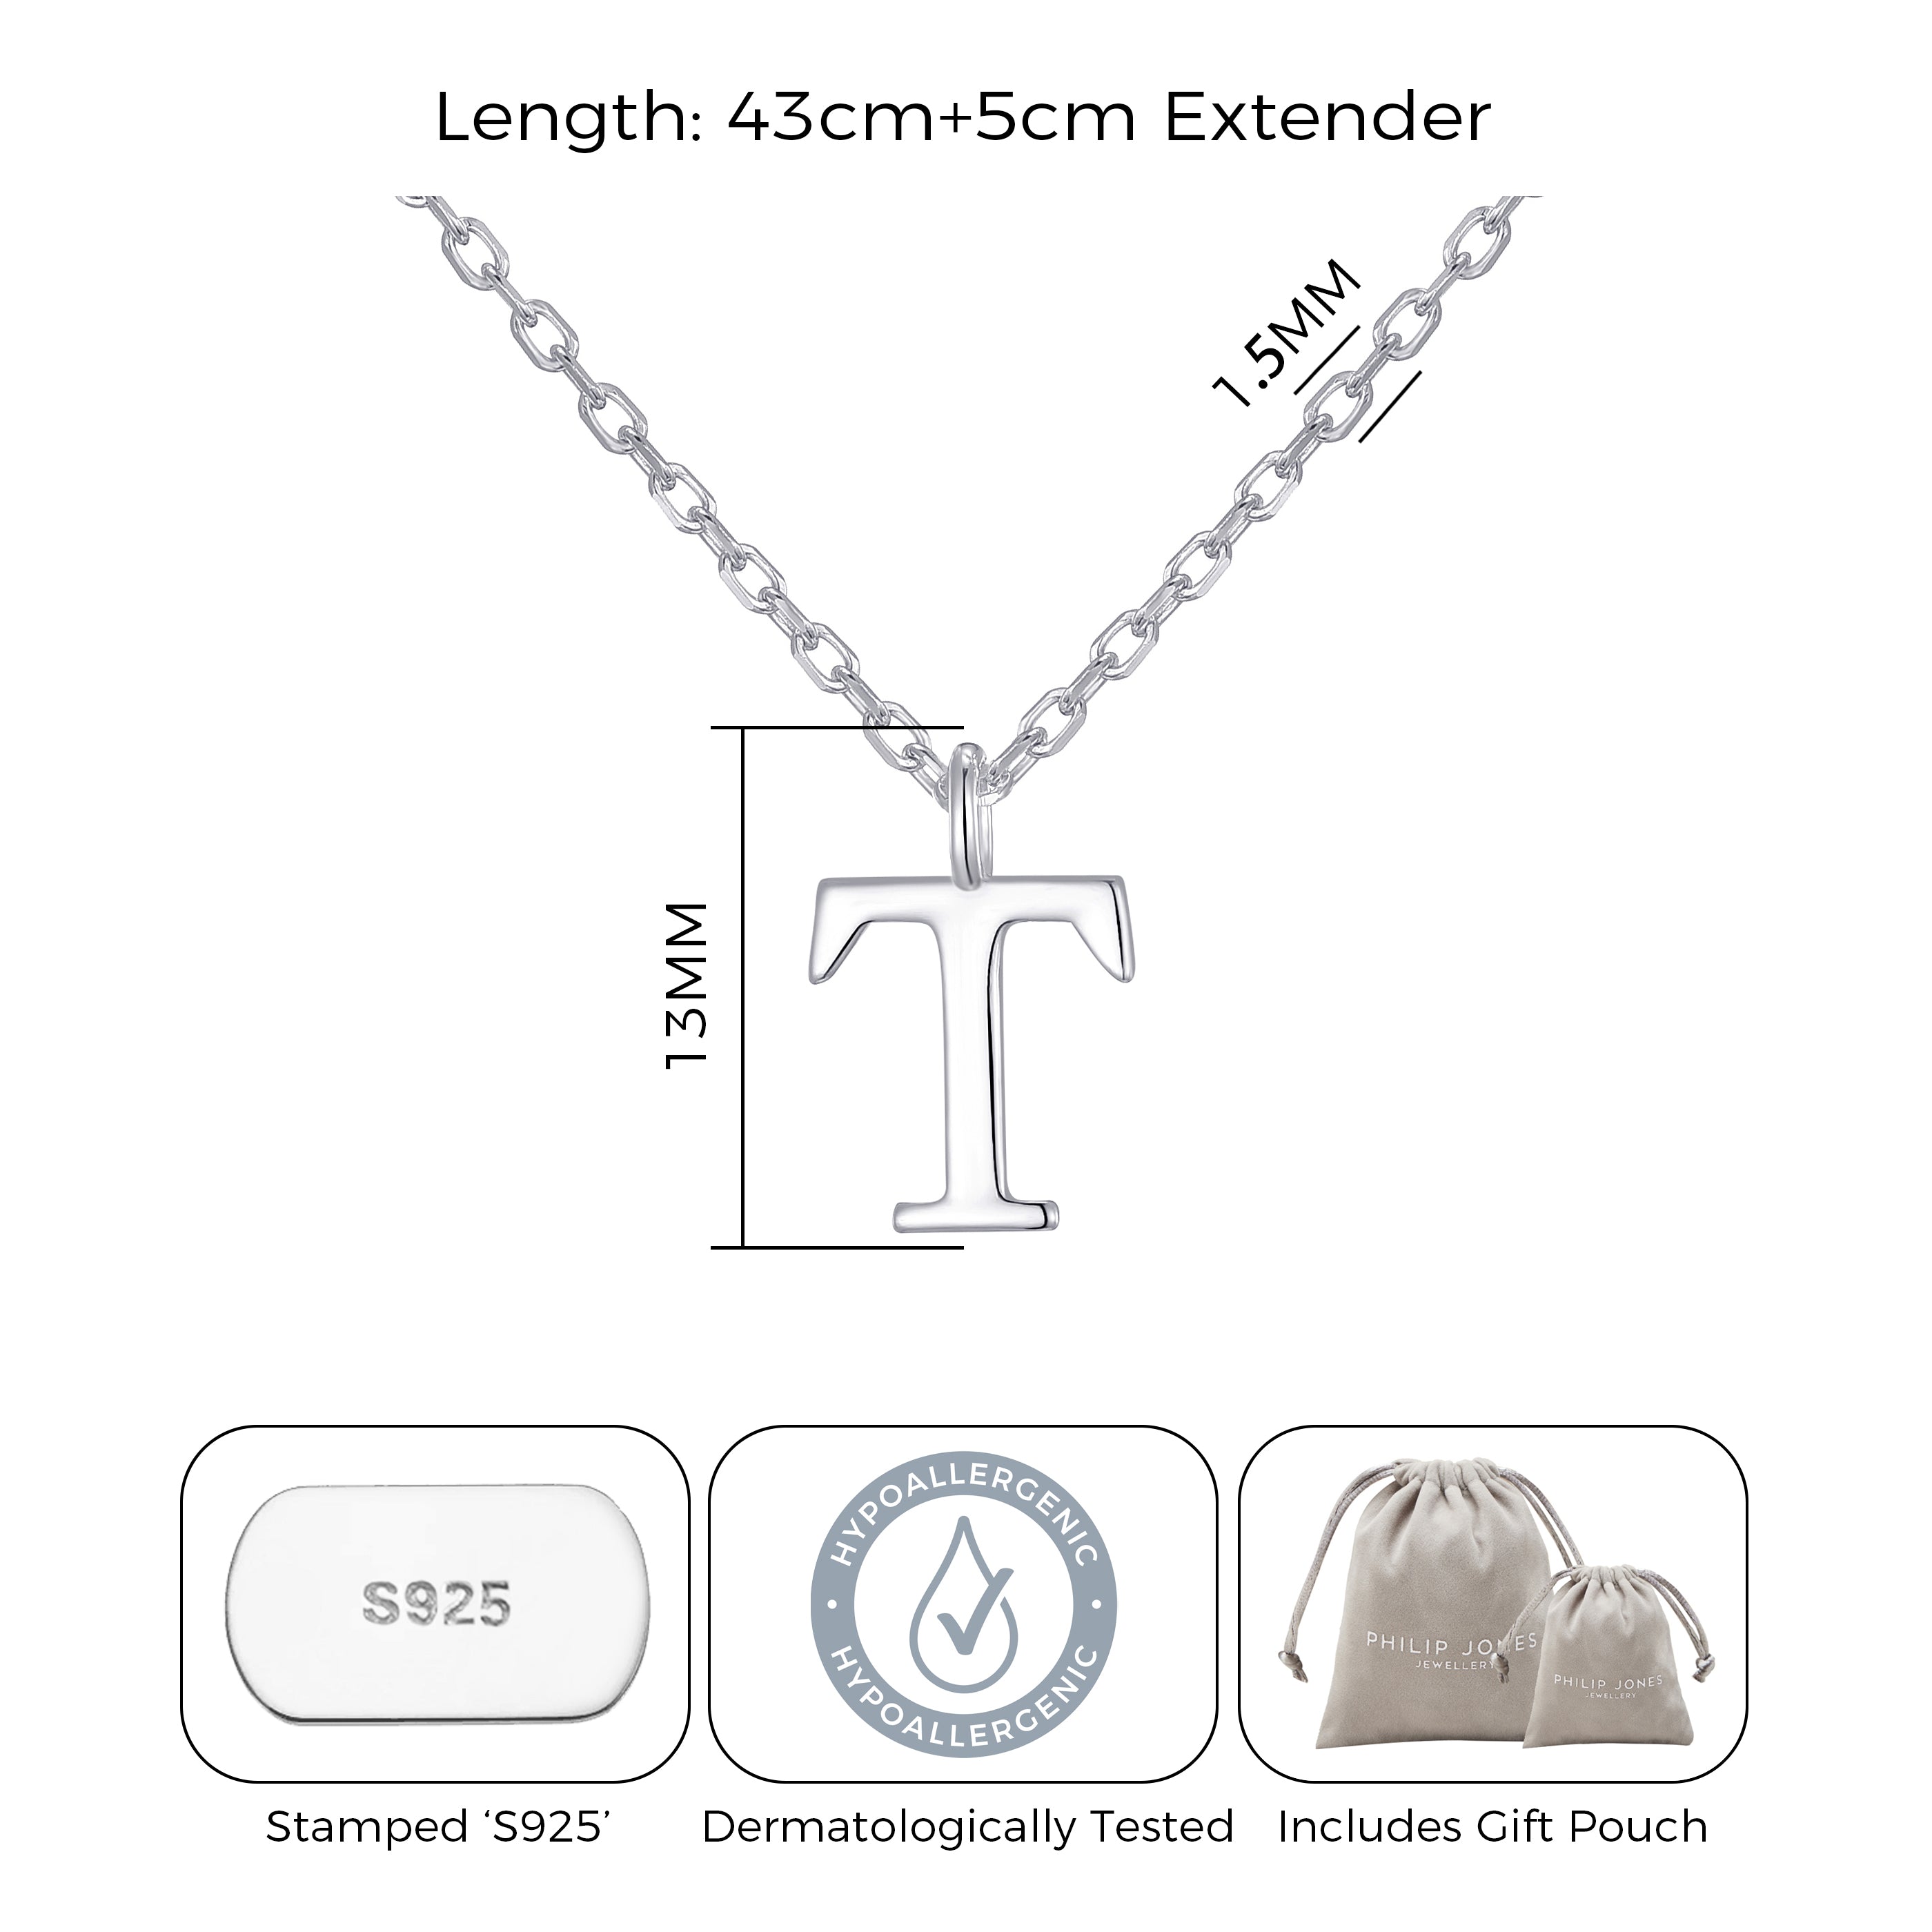 Sterling Silver Initial T Necklace